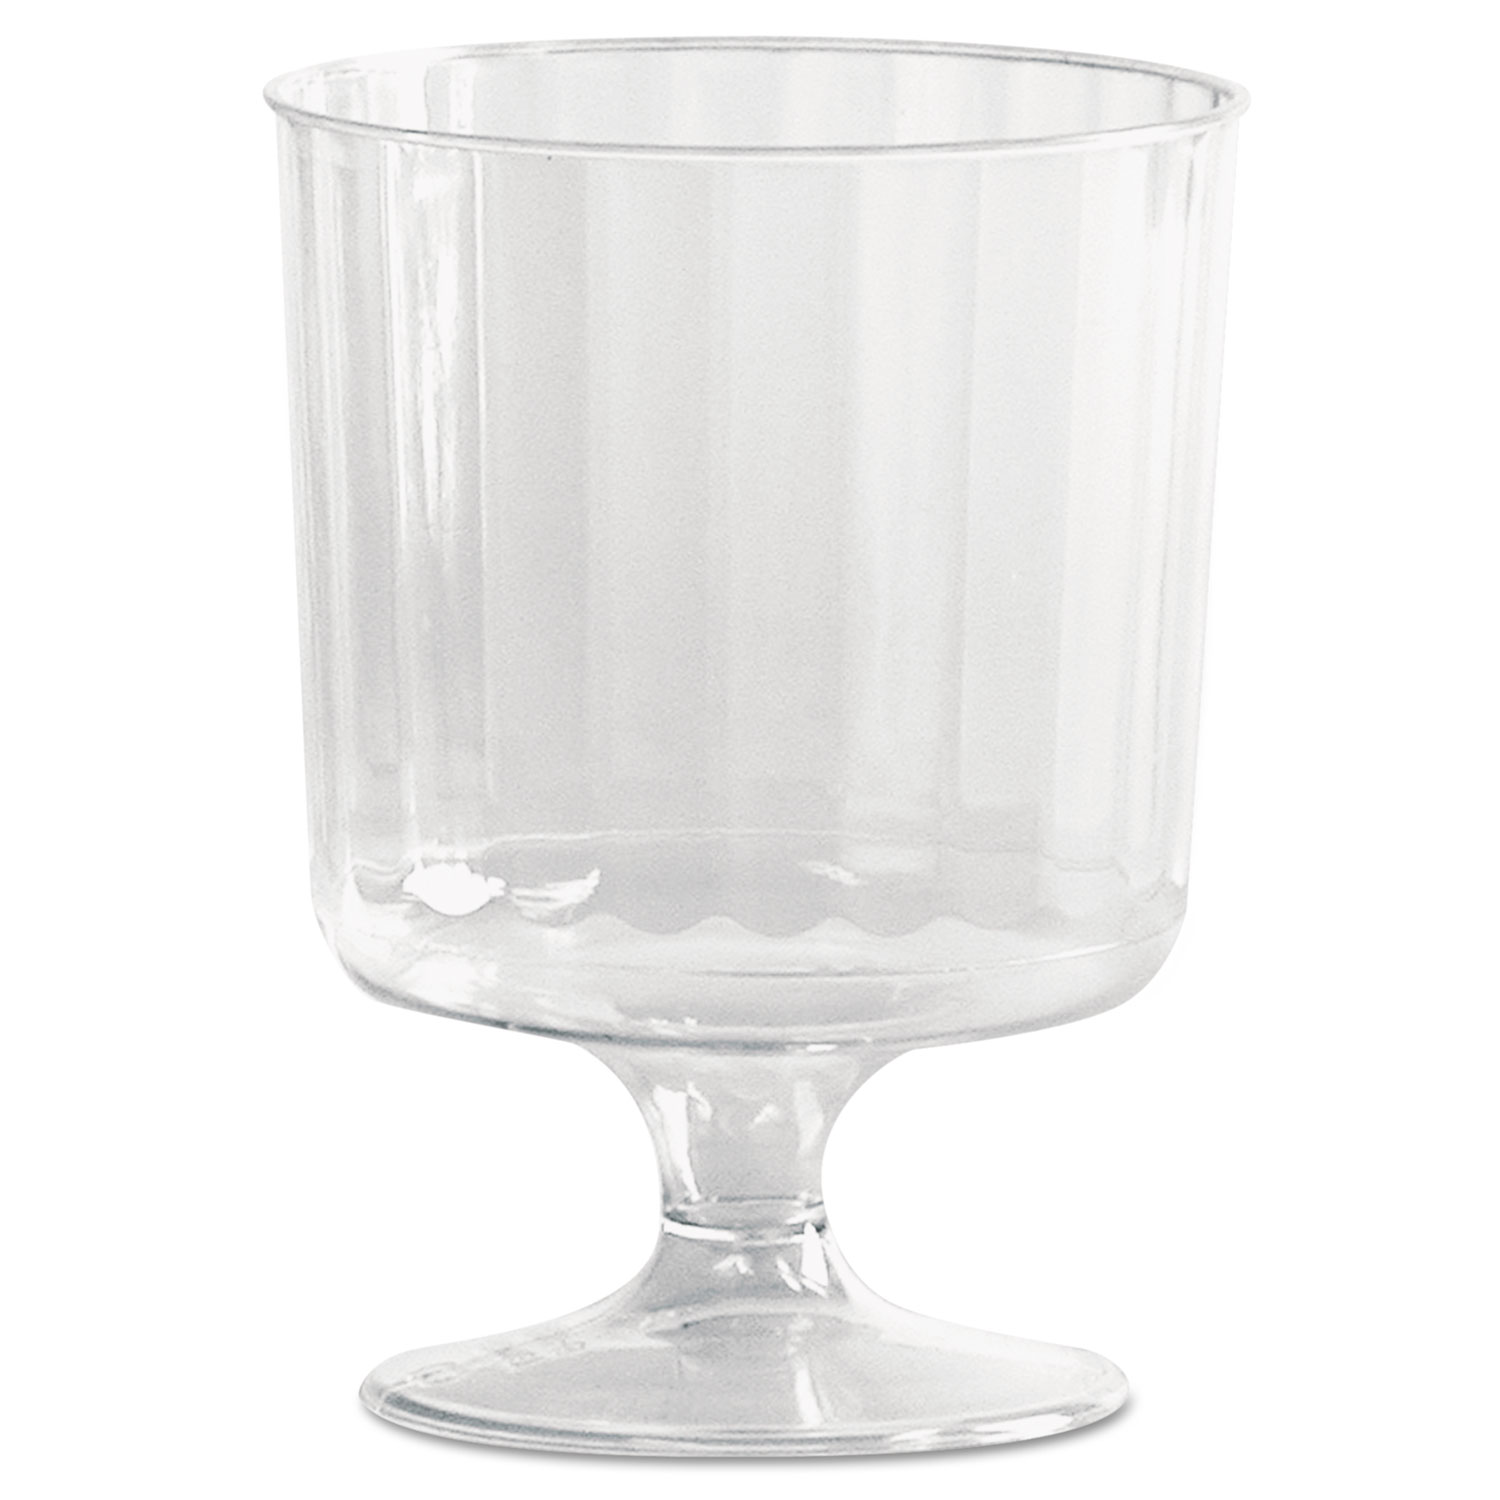  WNA WNA CCW5240 Classic Crystal Plastic Wine Glasses on Pedestals, 5 oz., Clear, Fluted, 10/Pack (WNACCW5240) 